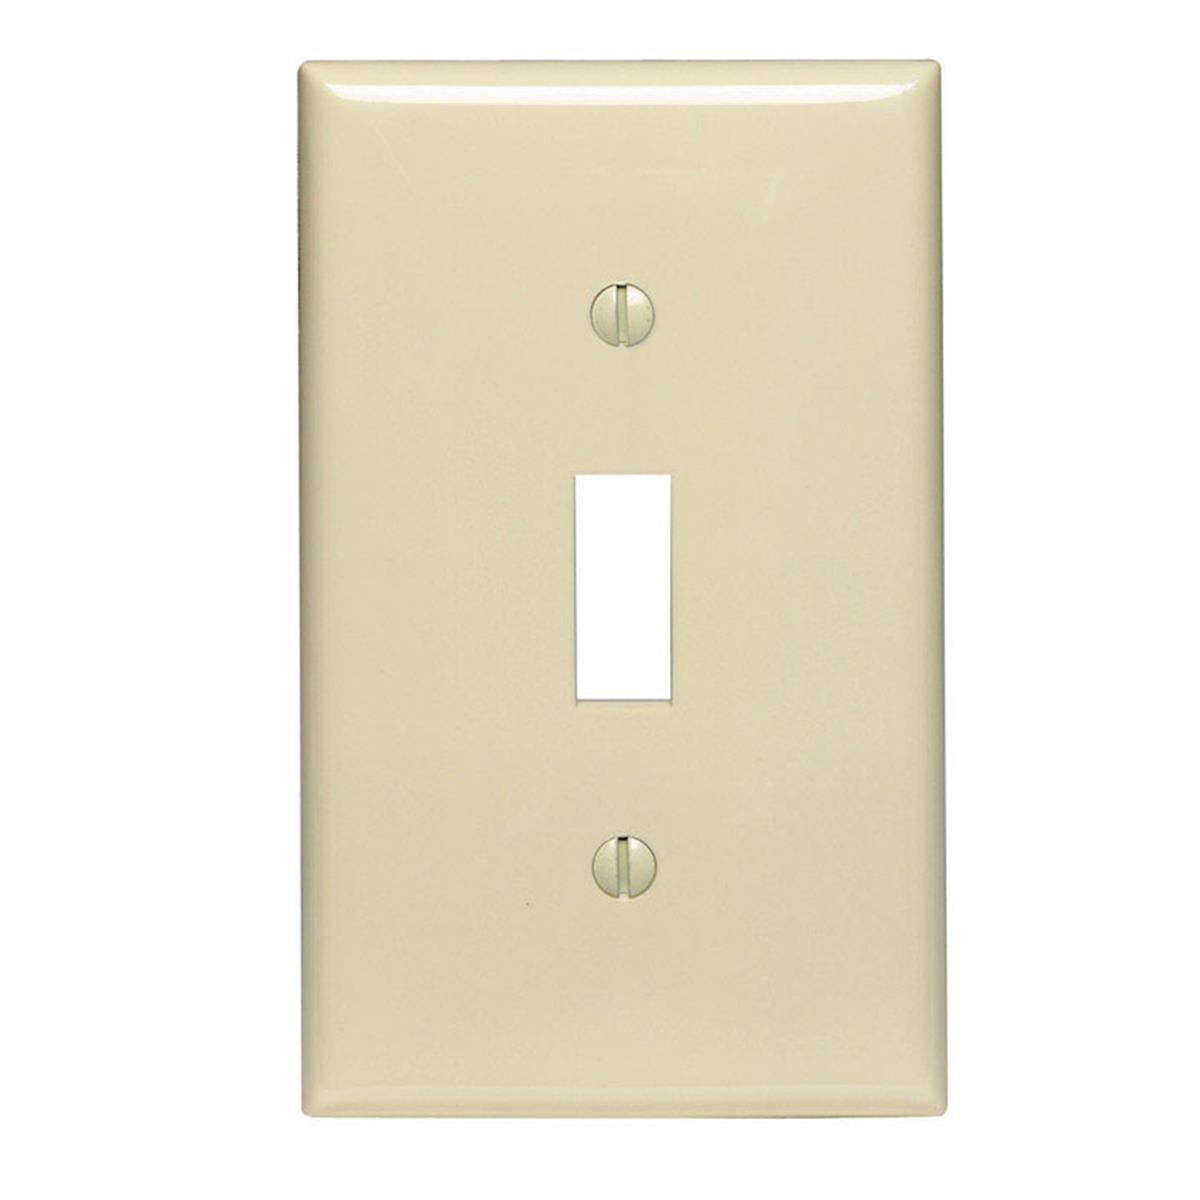 80701-00i 1-gang Toggle Switch Wall Plate Ivory- Pack Of 20